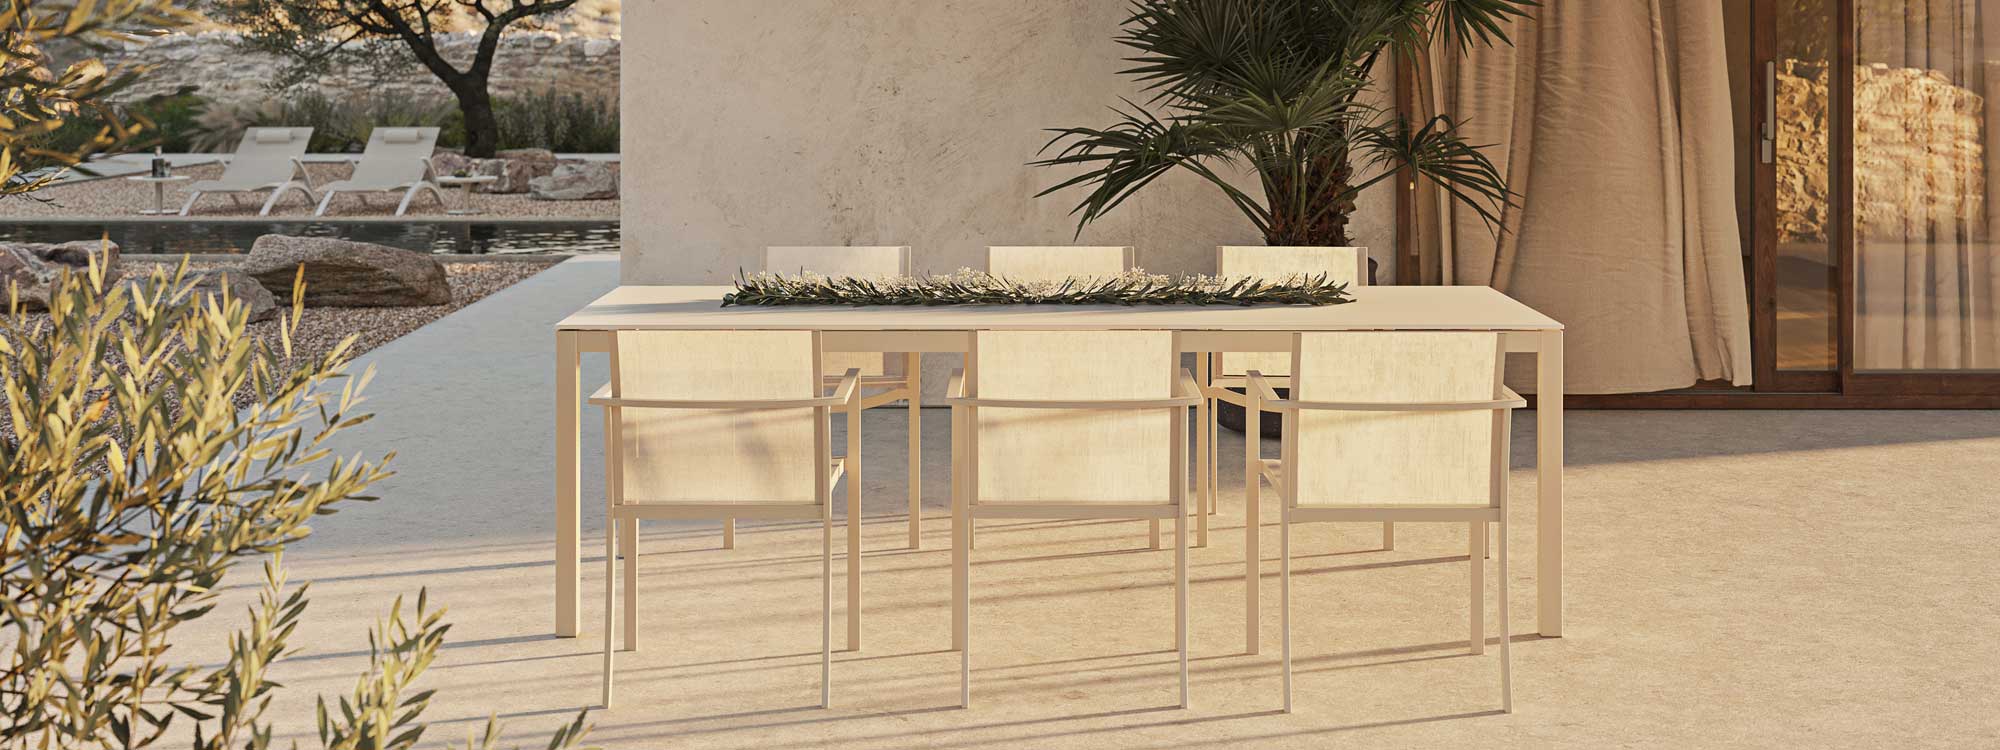 Image of white Ozon garden chairs and Taboela white dining table by Royal Botania